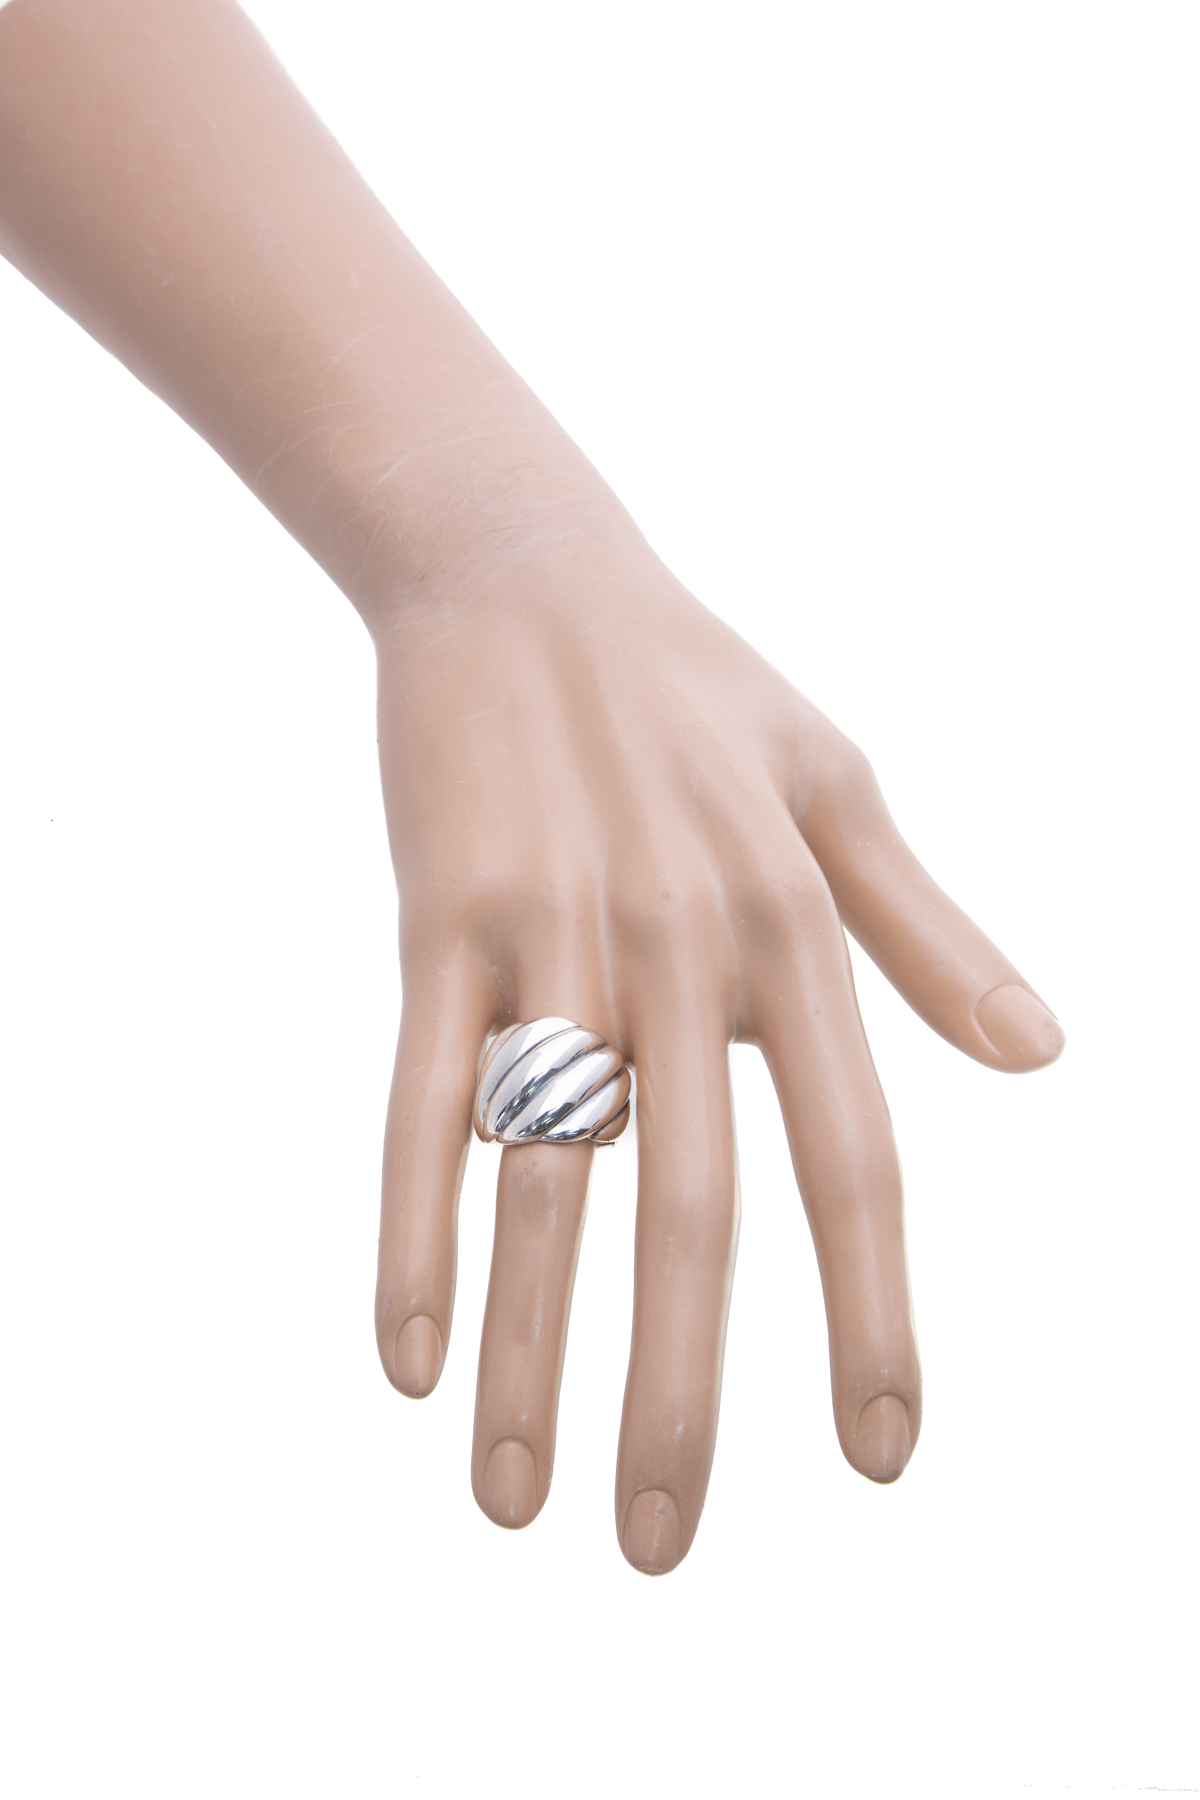 David Yurman Silver Sculpted Cable Ring - Size 7